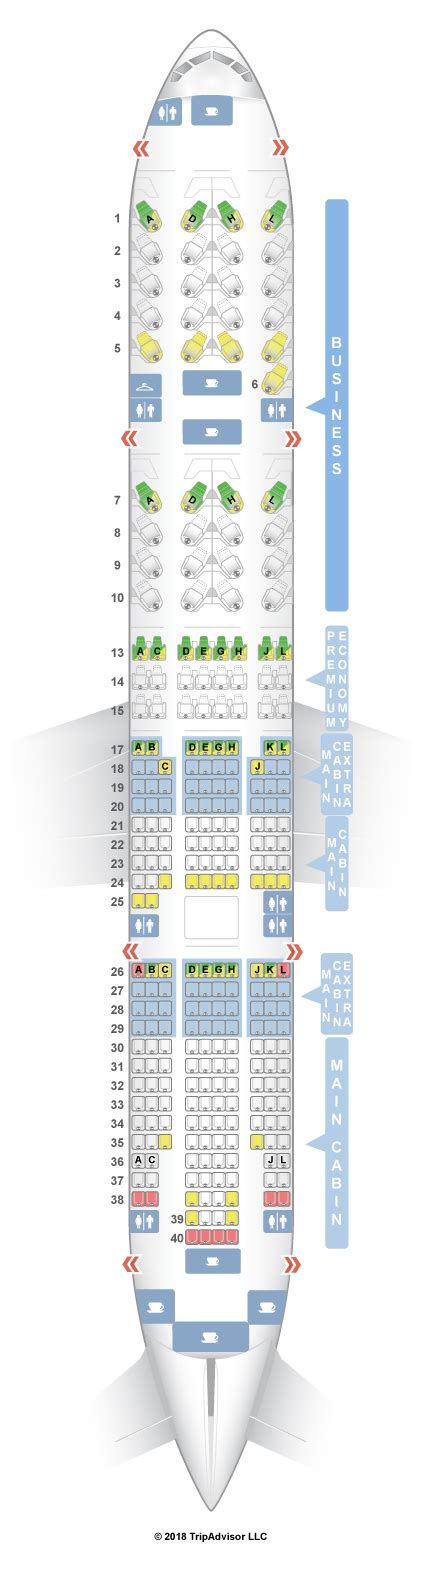 United Airlines' Boeing 777-200 provides a range of seating 